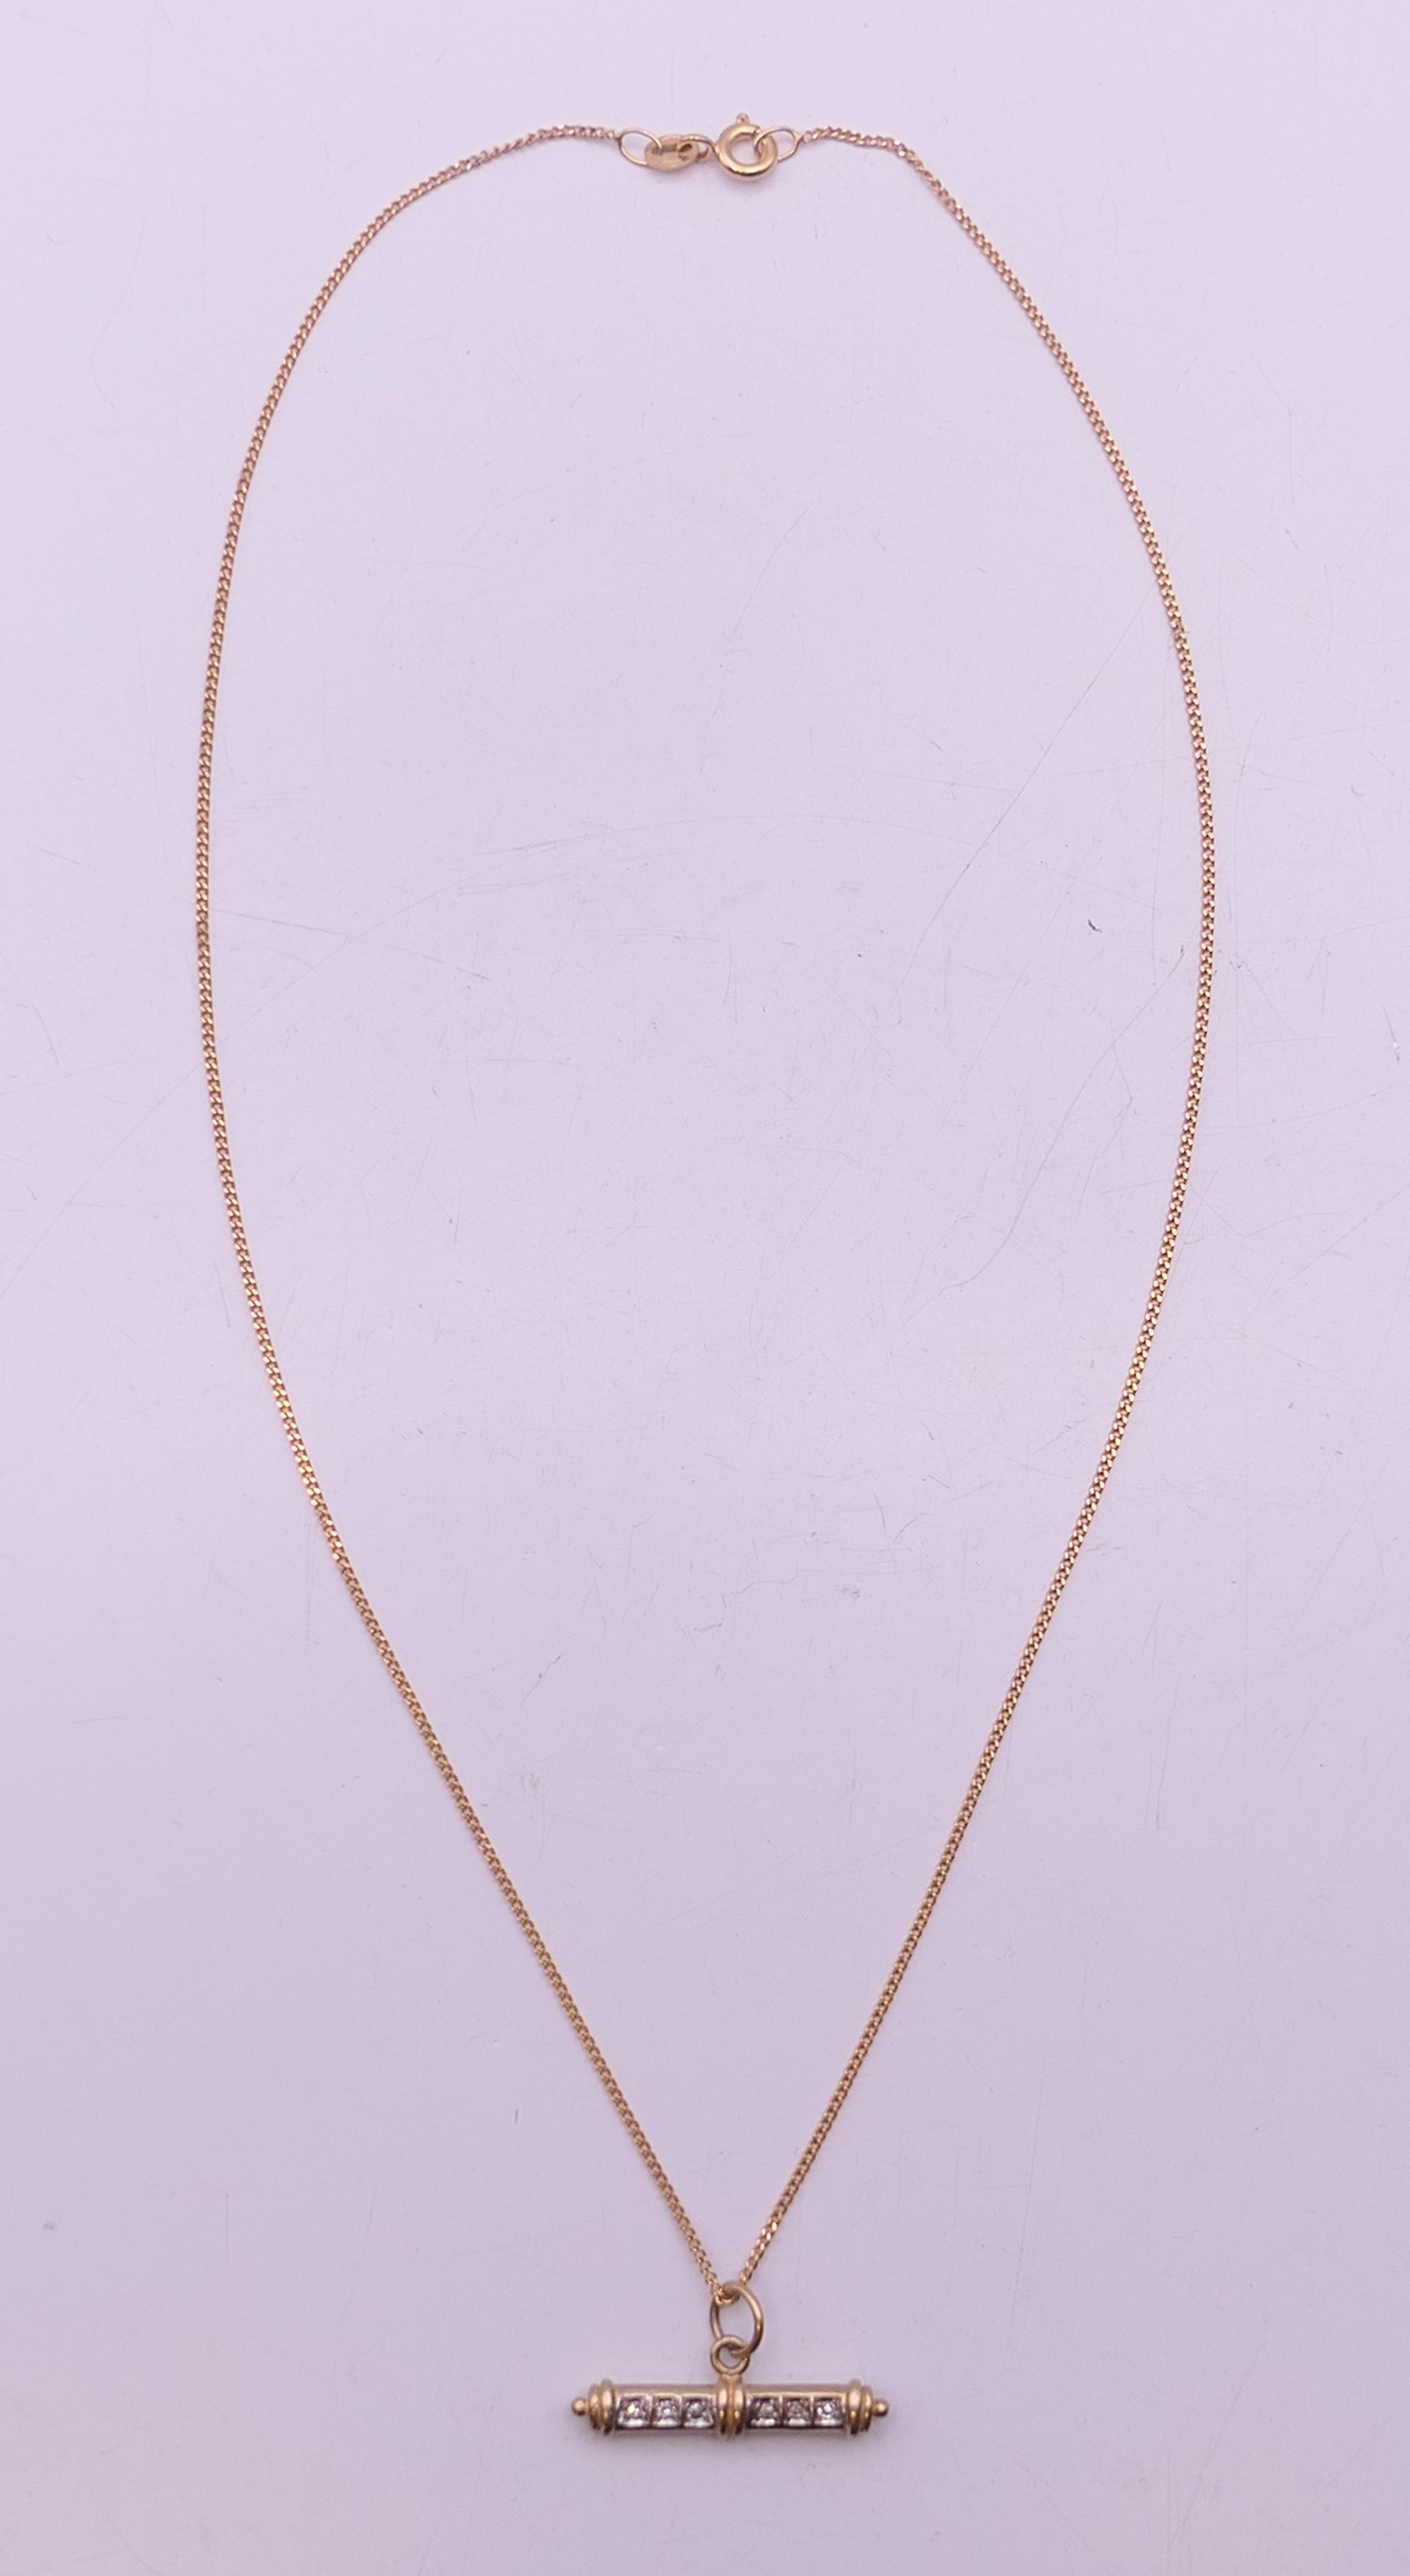 A 9 ct gold diamond set T-bar on a 9 ct gold chain. Bar 2.5 cm long, chain 41 cm long. 3. - Image 2 of 6